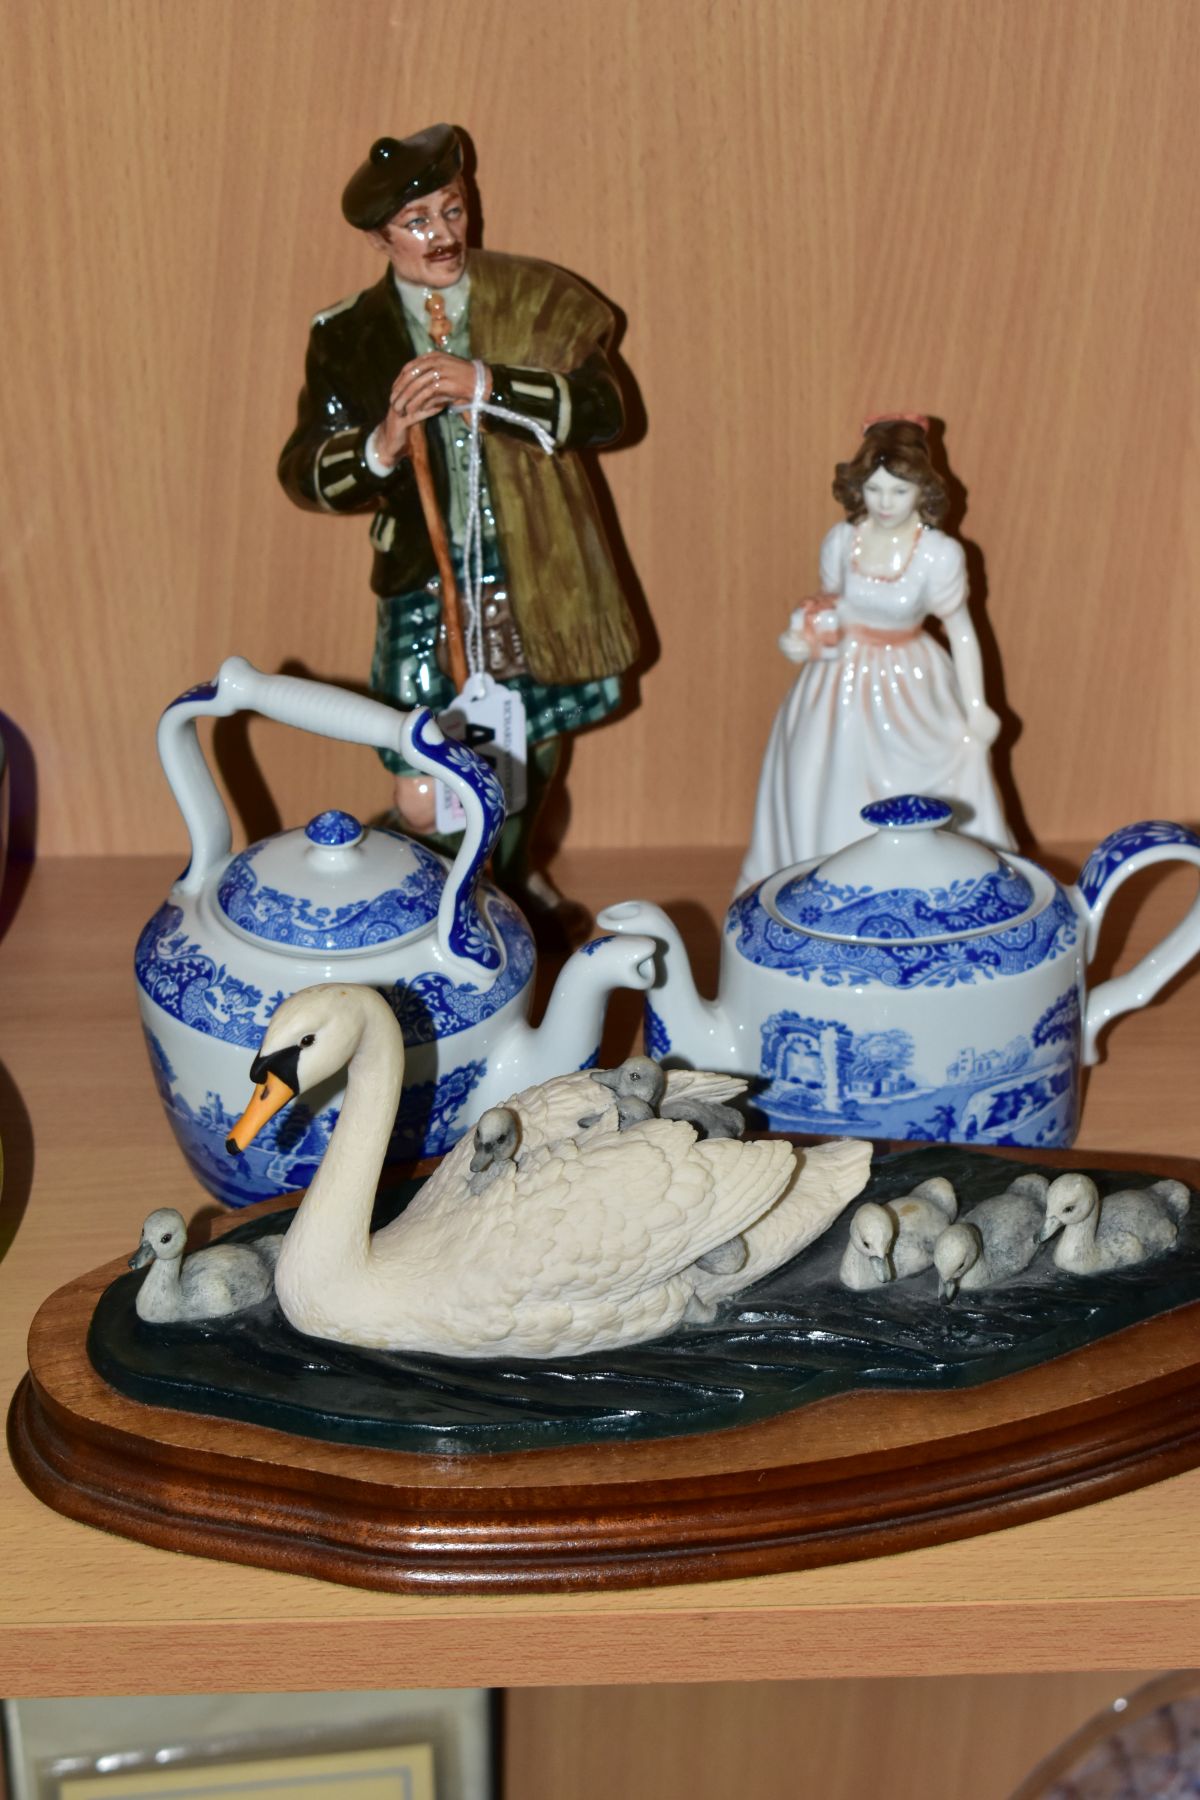 TWO ROYAL DOULTON FIGURES, A BORDER FINE ARTS SCULPTURE AND TWO SPODE 'ITALIAN' MINIATURE PIECES,